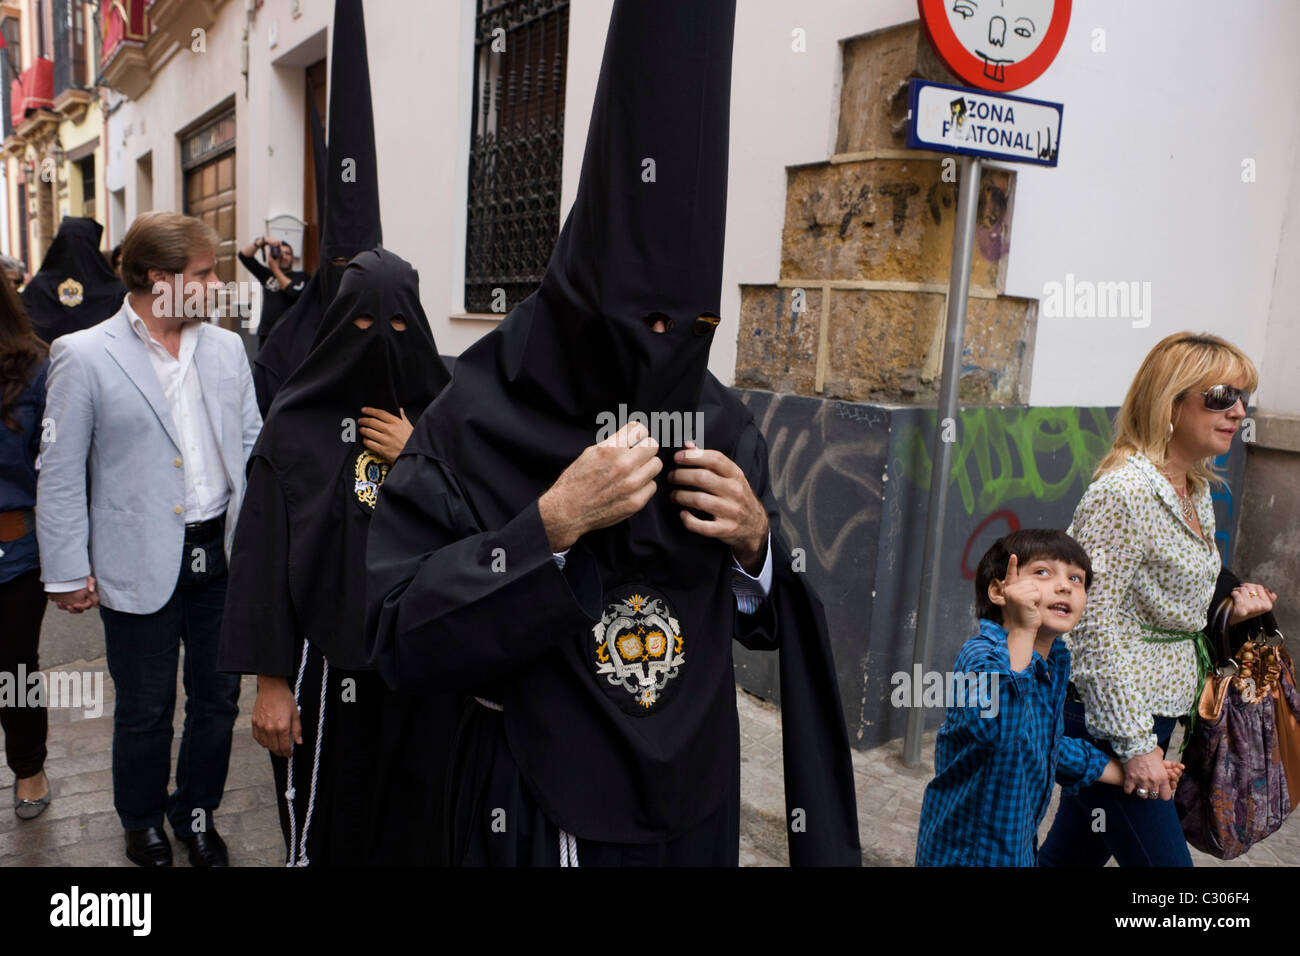 Hooded penitents (Nazarenos) gather for Seville's annual Semana Santa Easter passion processions. Stock Photo